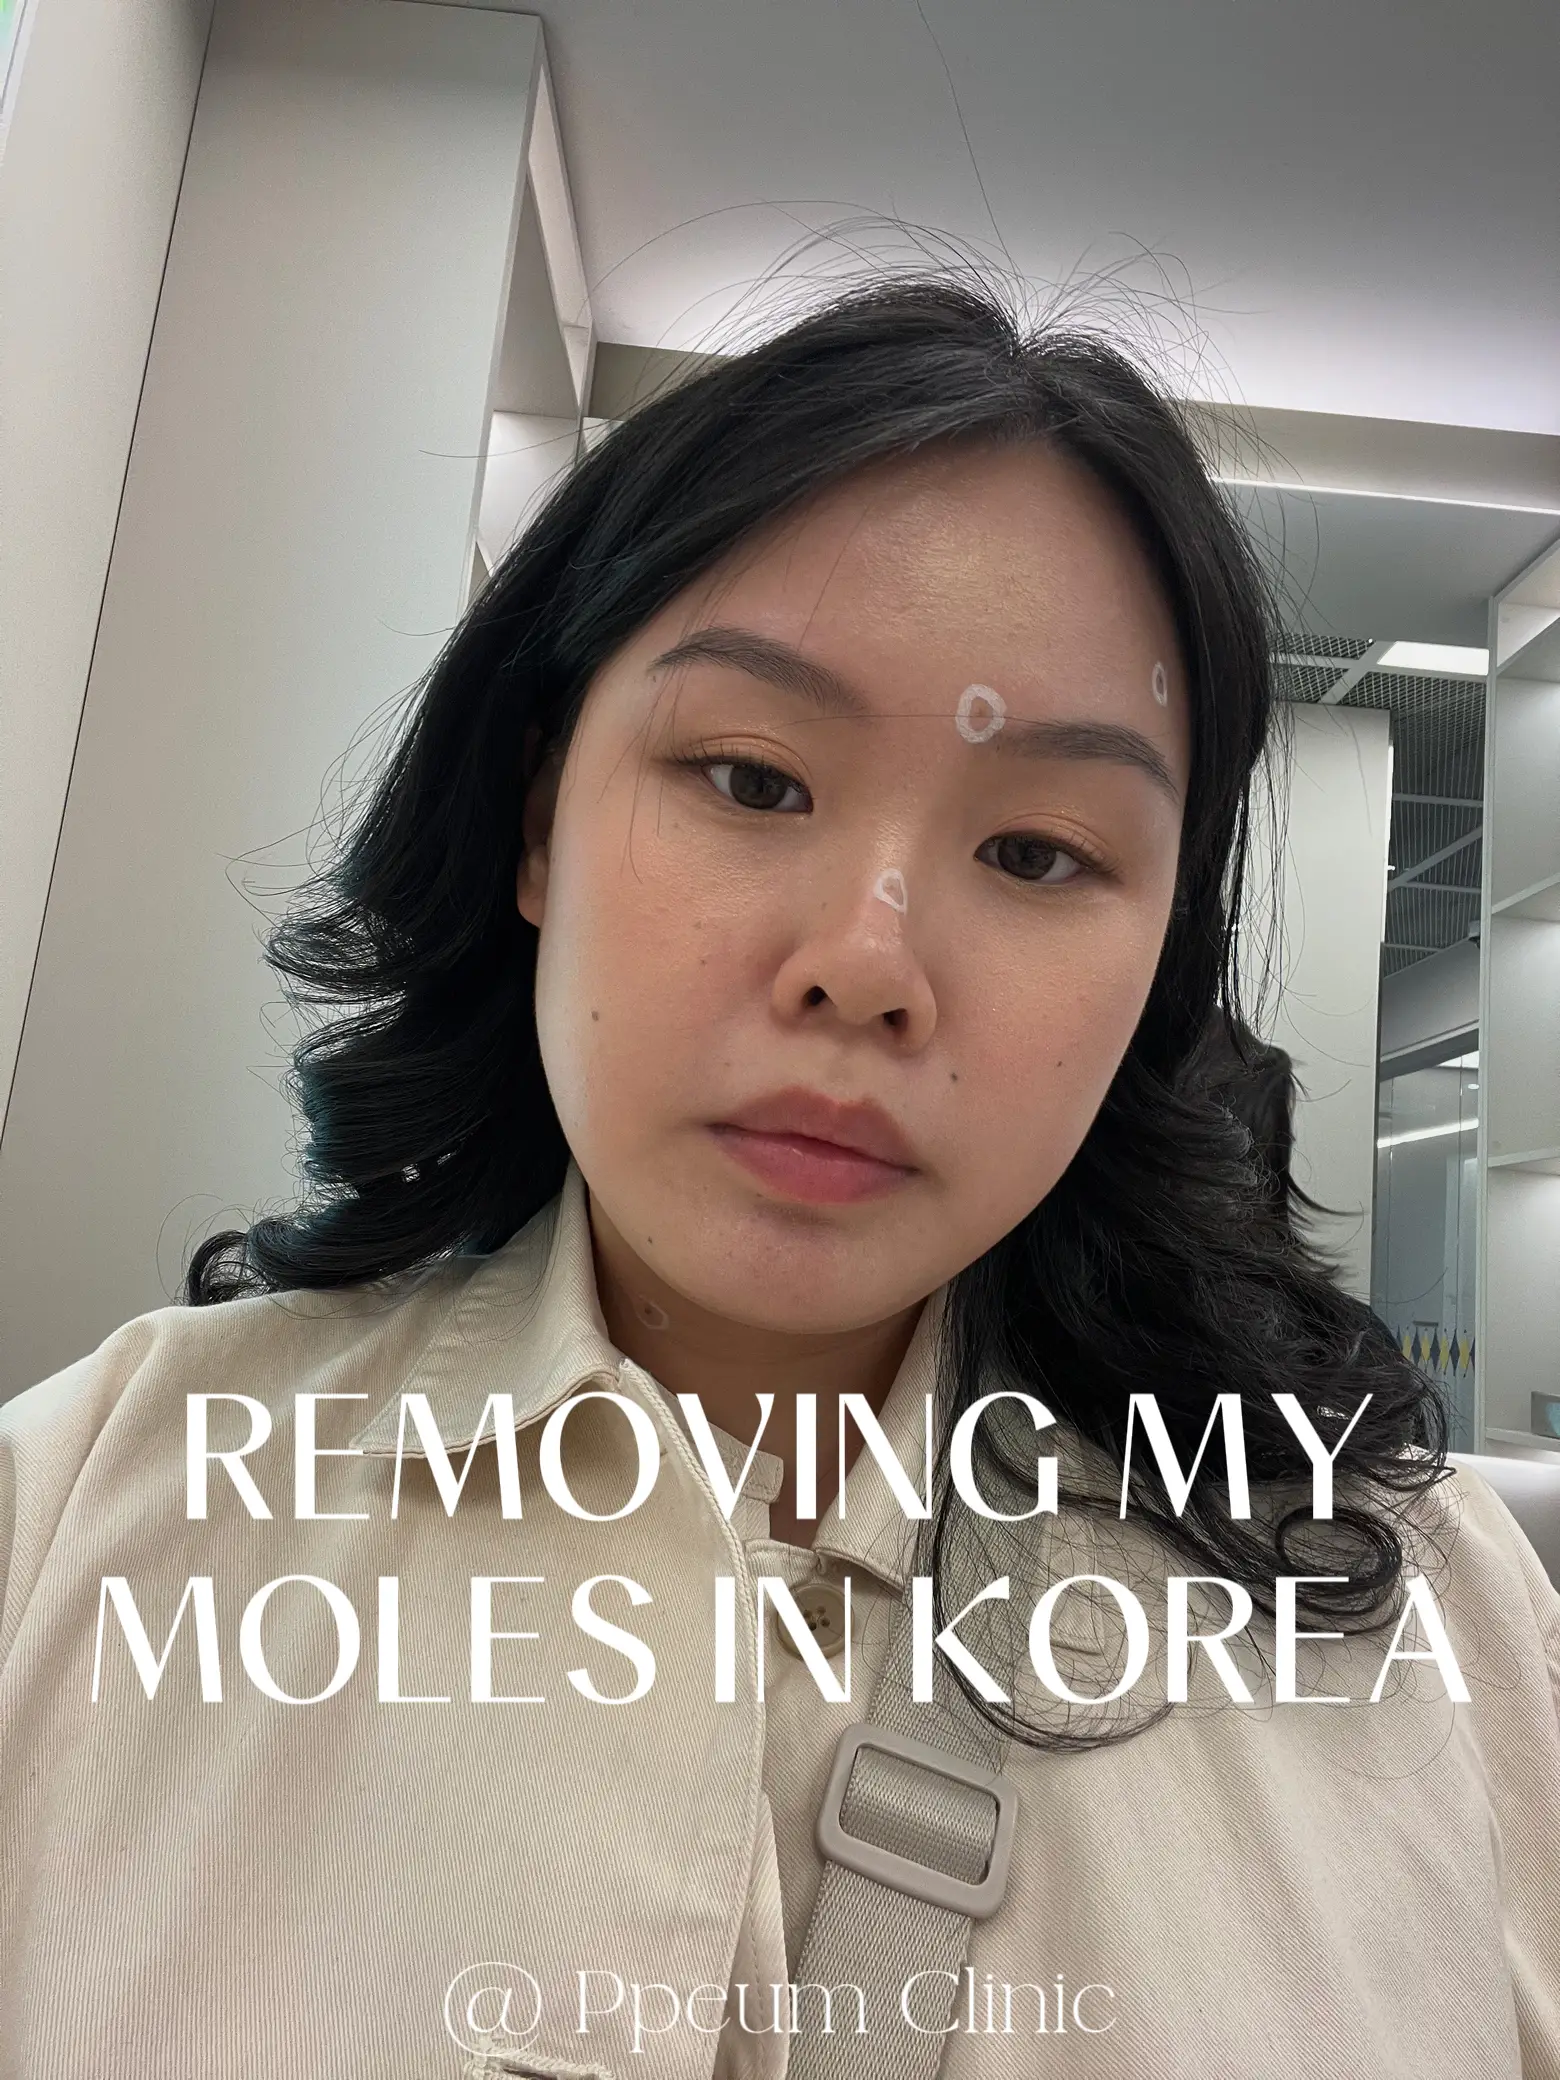 All you need to know about mole removal in Korea 🇰🇷's images(0)